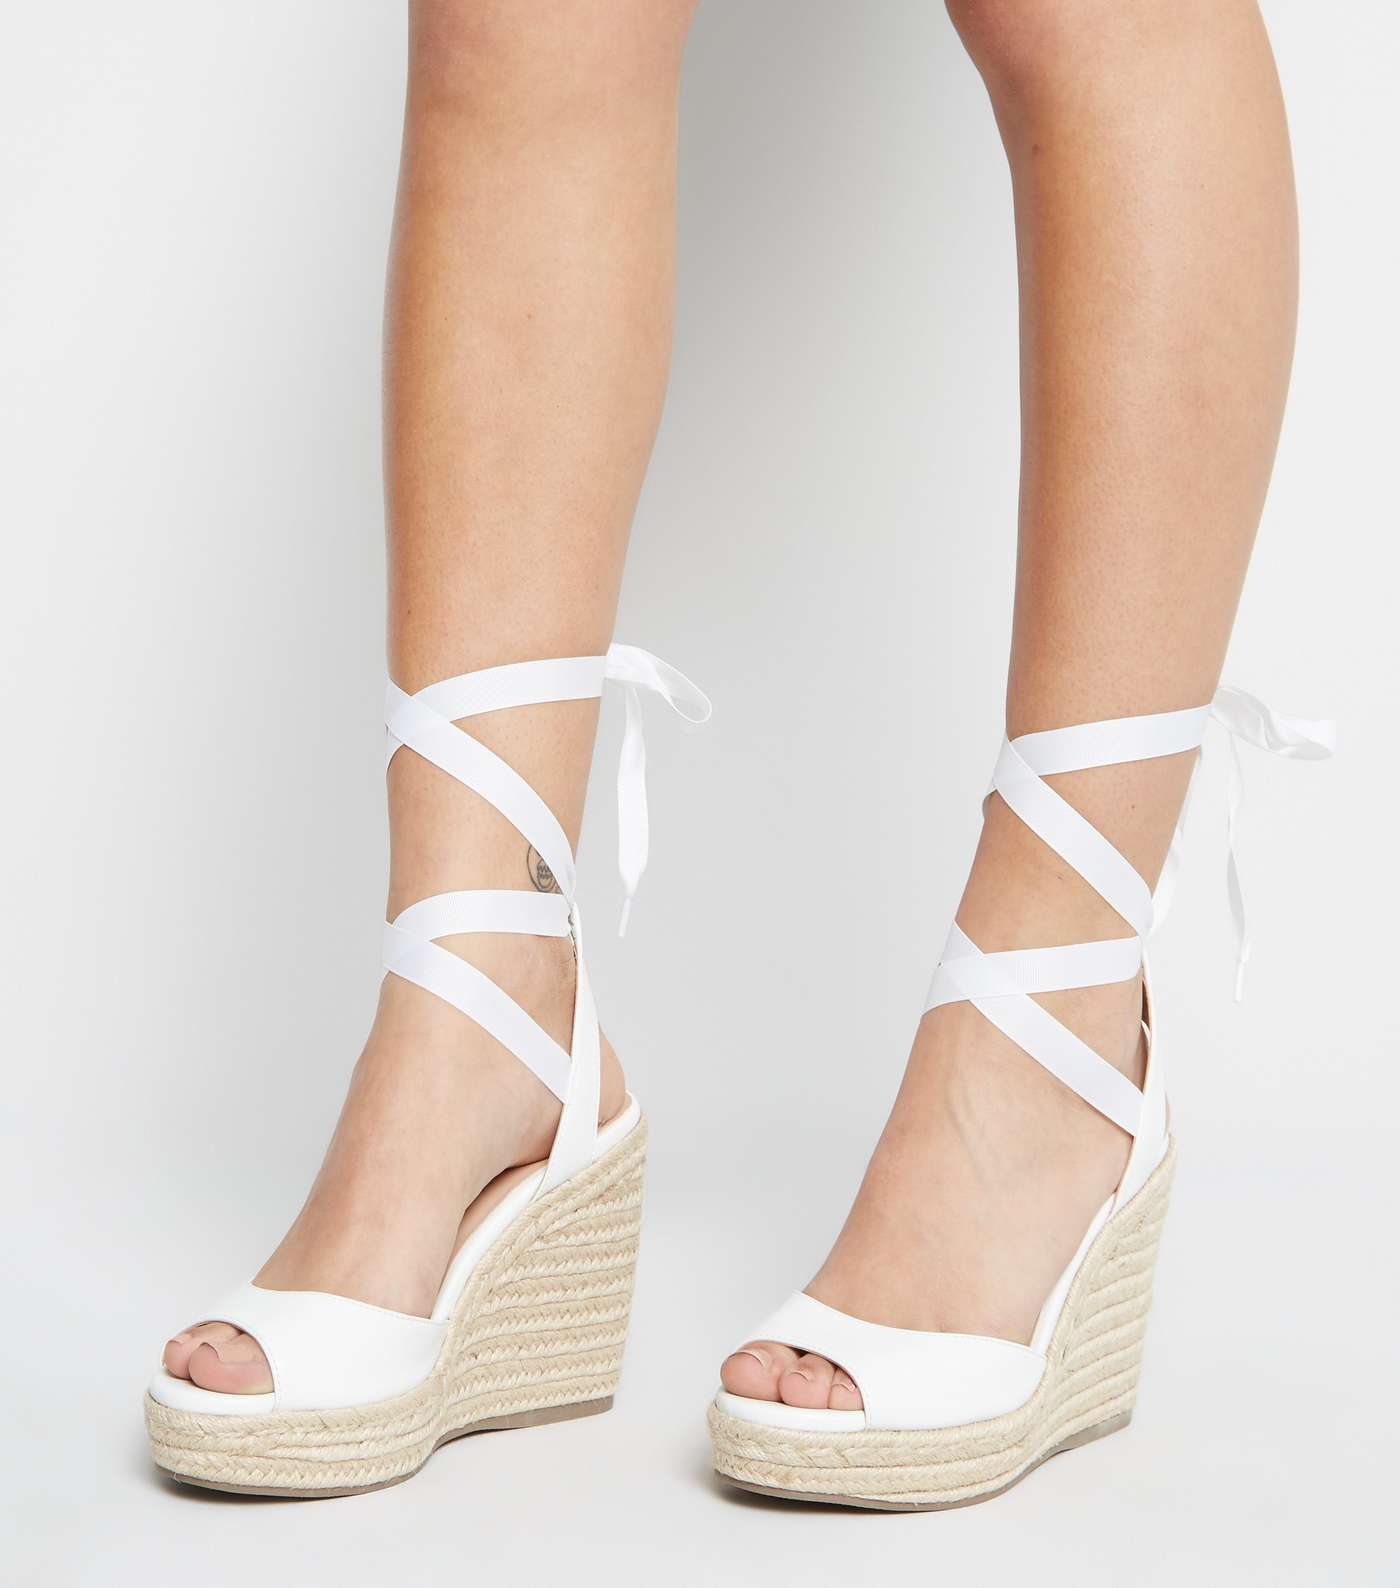 White Leather-Look Ankle Tie Espadrille Wedges Image 2